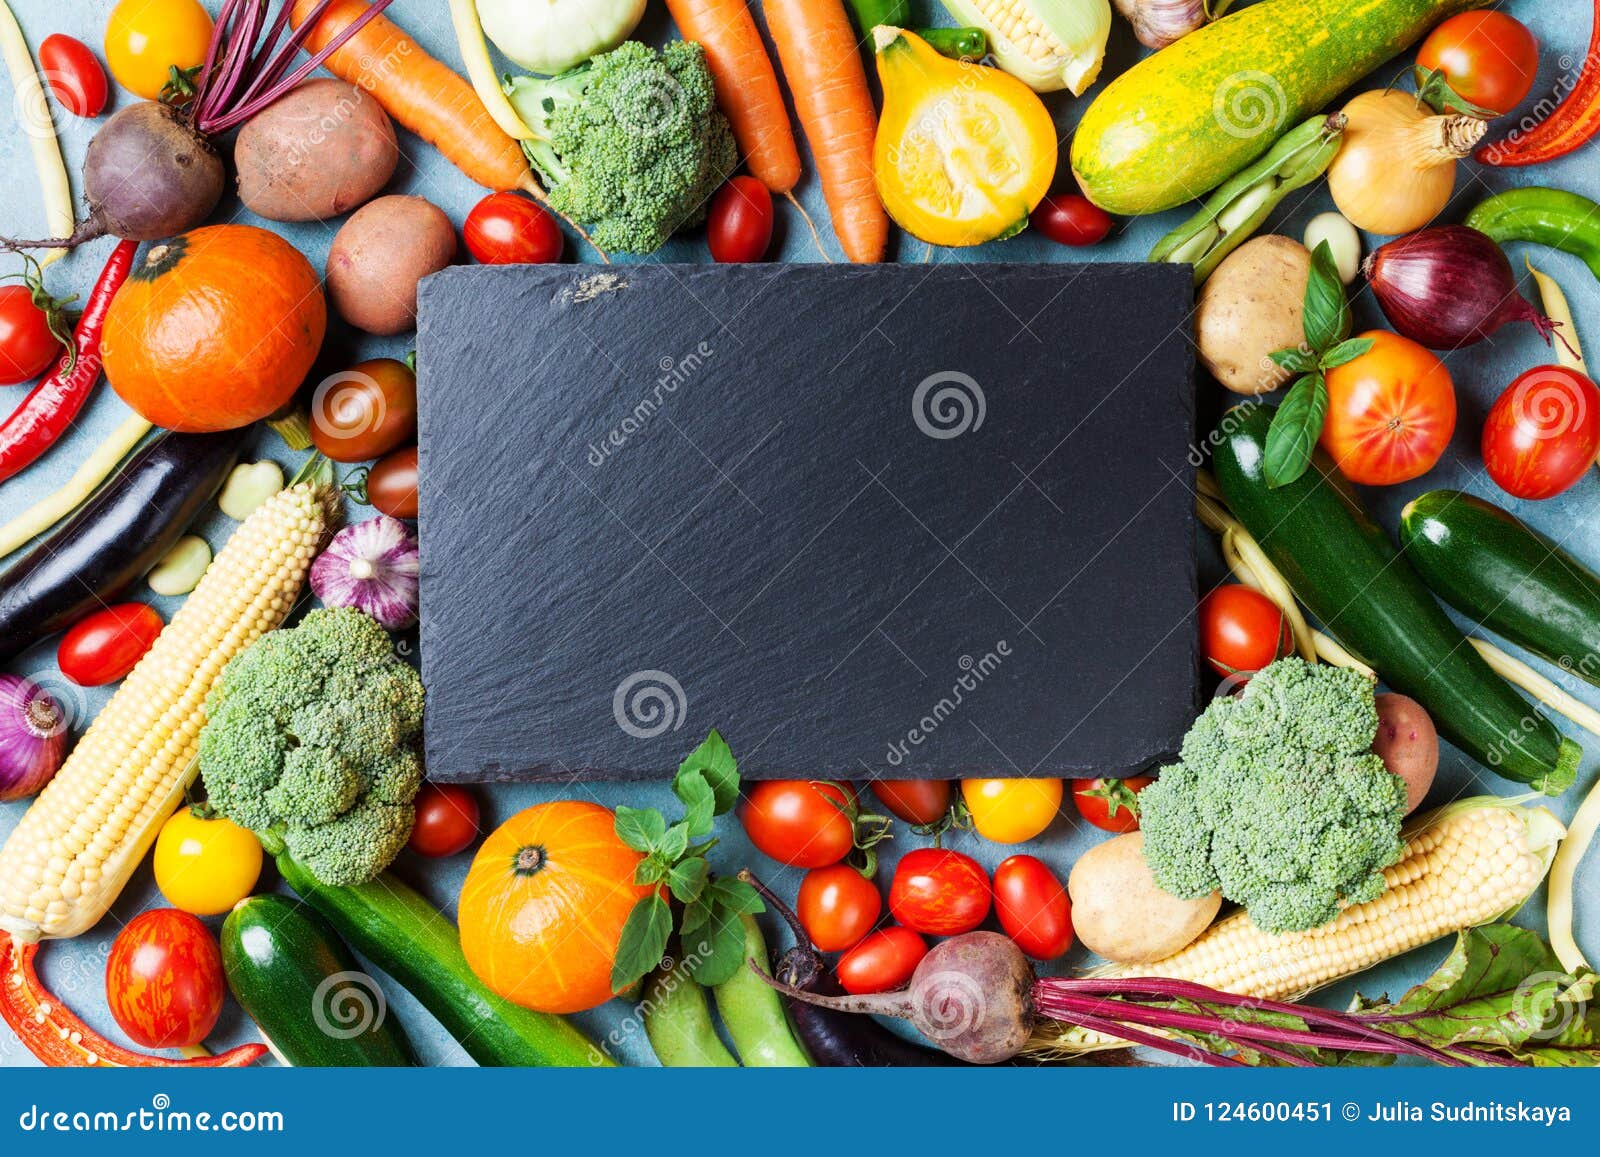 autumn farm vegetables, root crops and slate cutting board top view with copy space for menu or recipe. healthy food background.